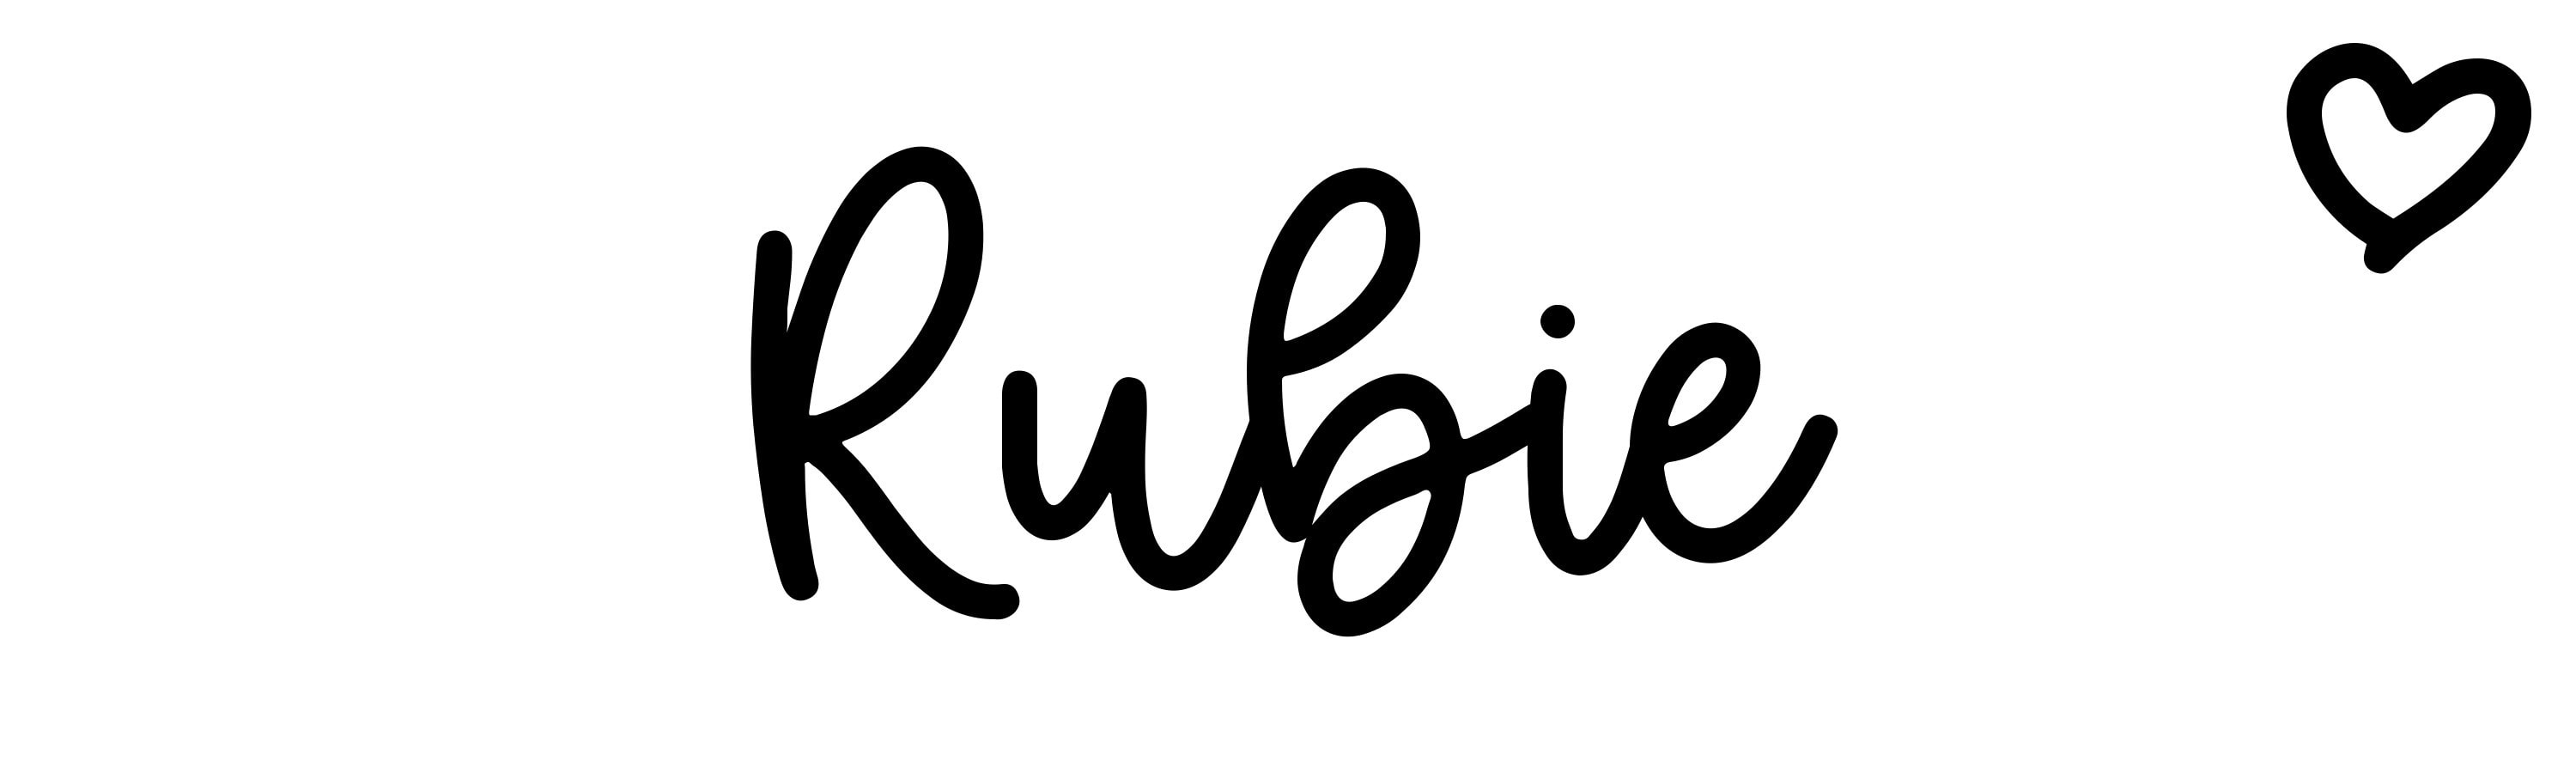 About the baby name Rubie - Click Baby Names